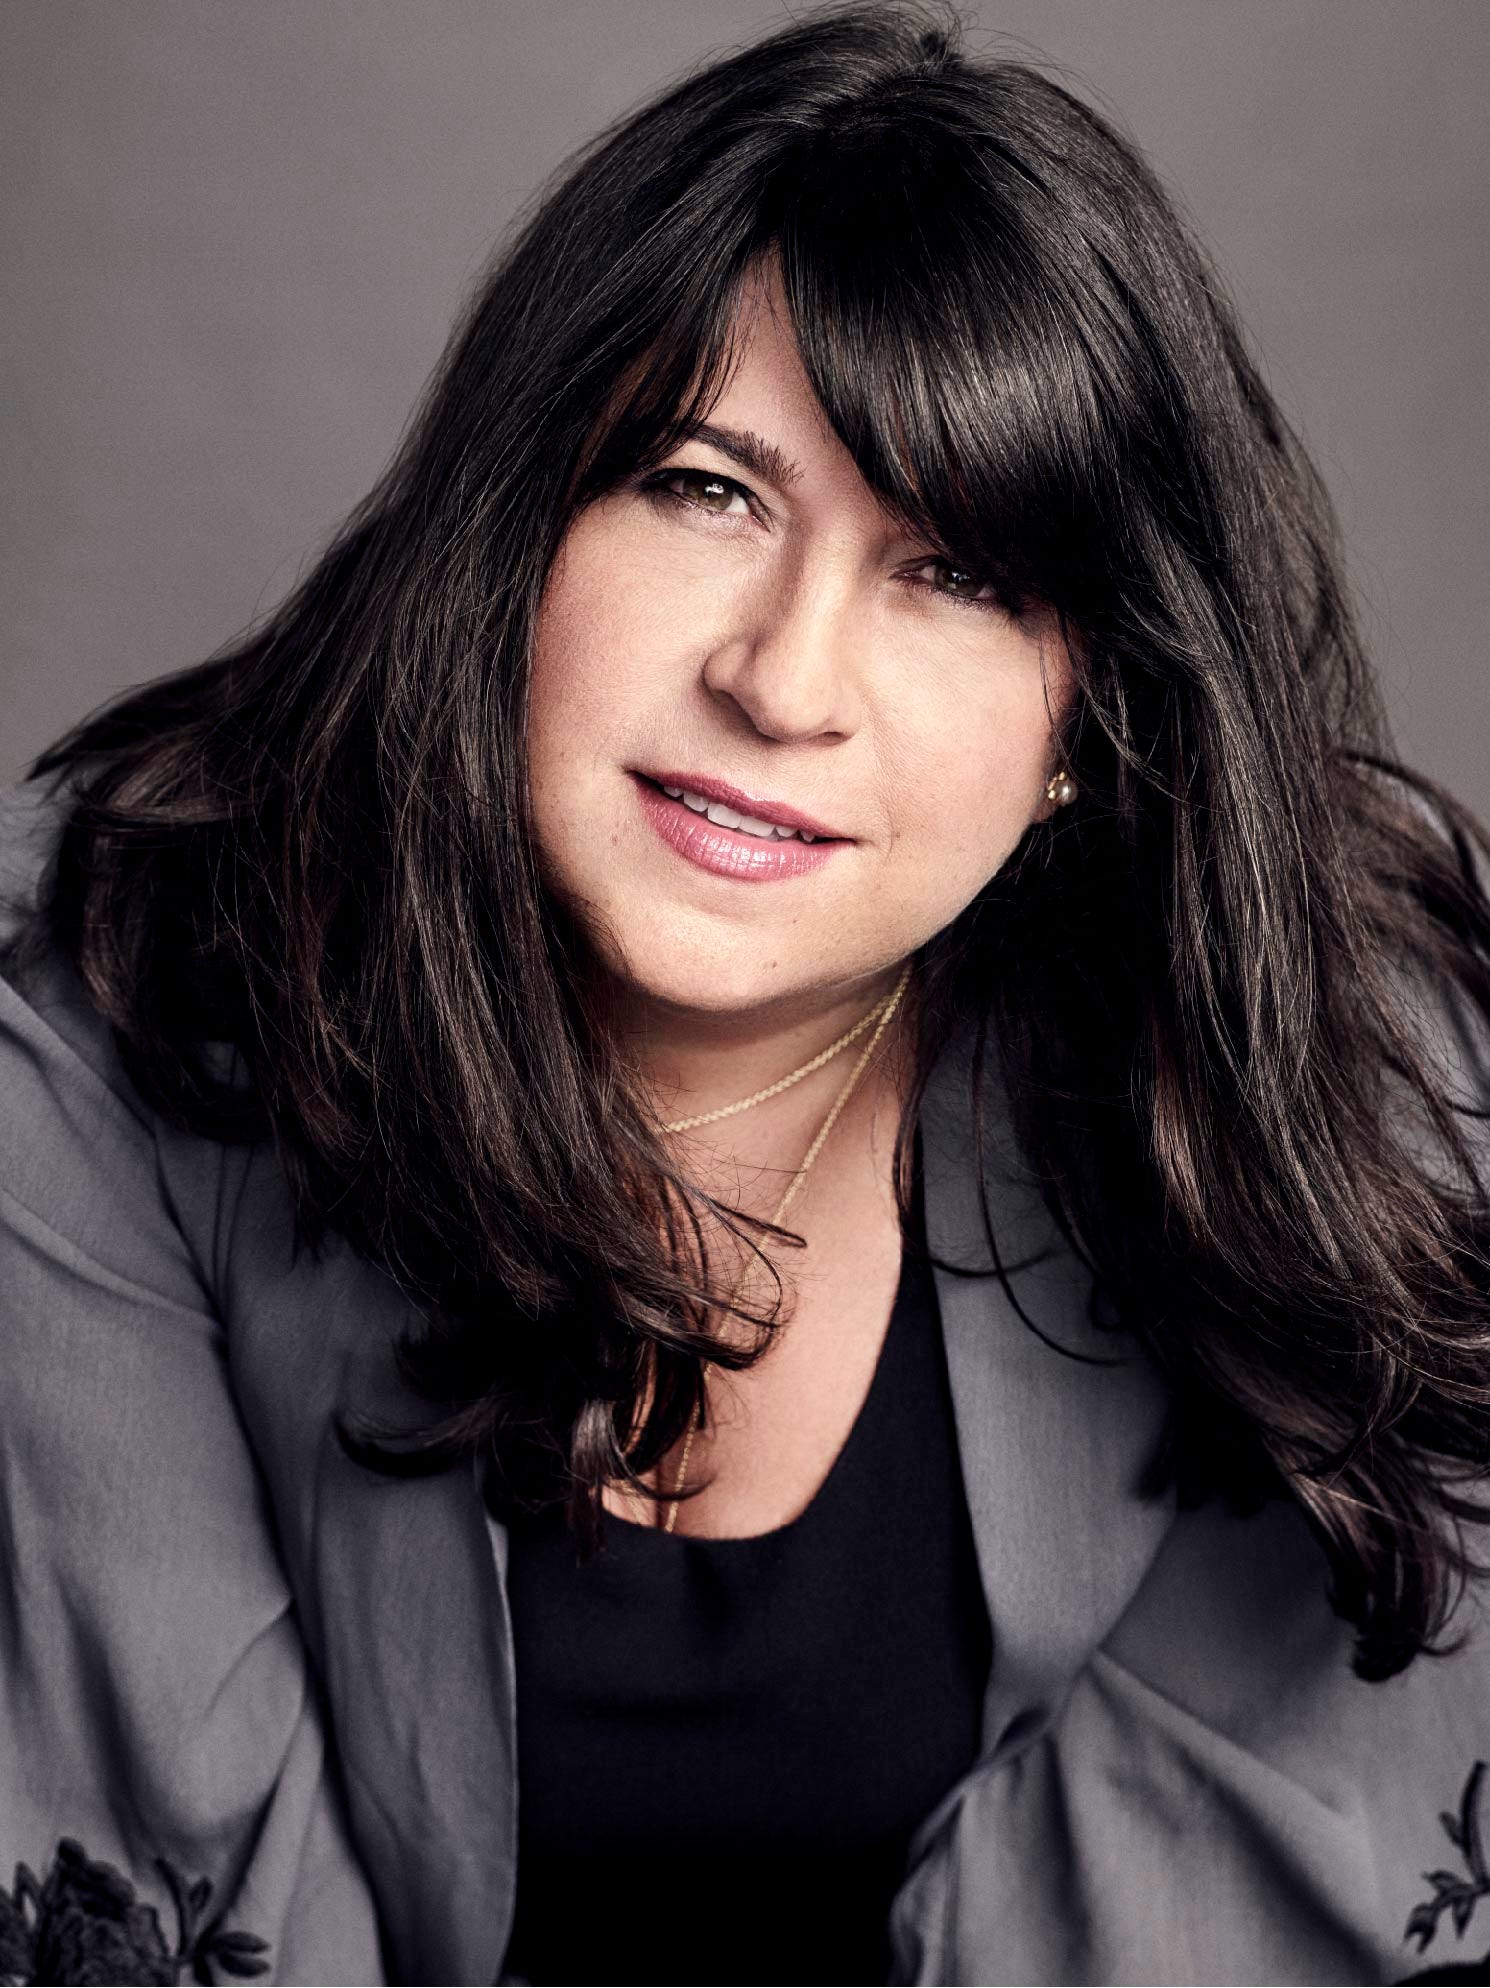 Fifty Shades Of Grey Author E L James Pens Tamer Book The Mister